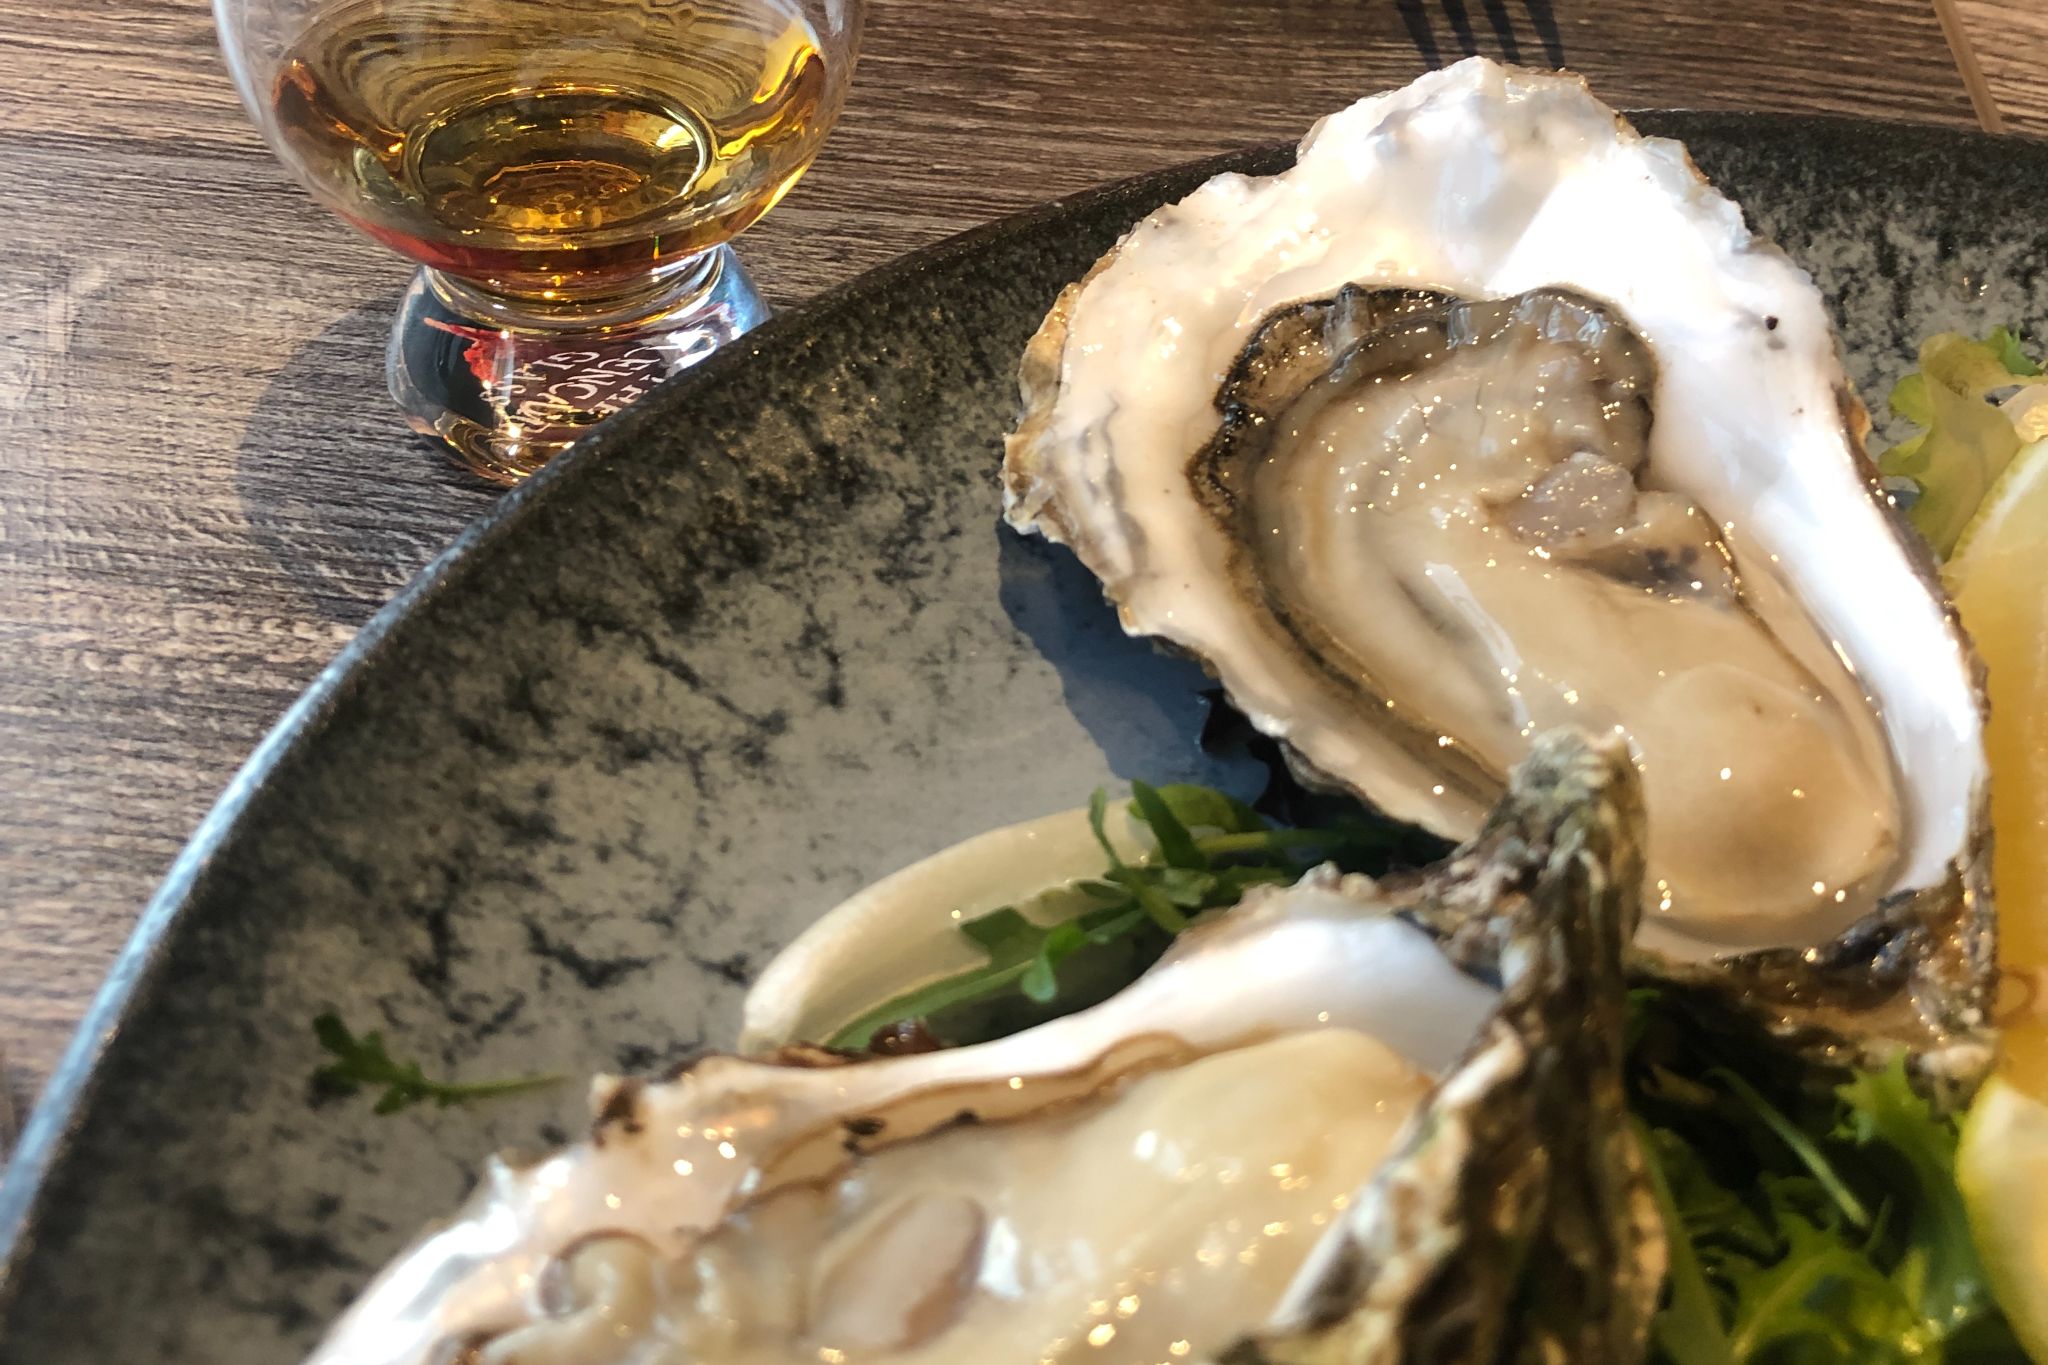 A plate of oysters at Ee-Usk restaurant in Oban